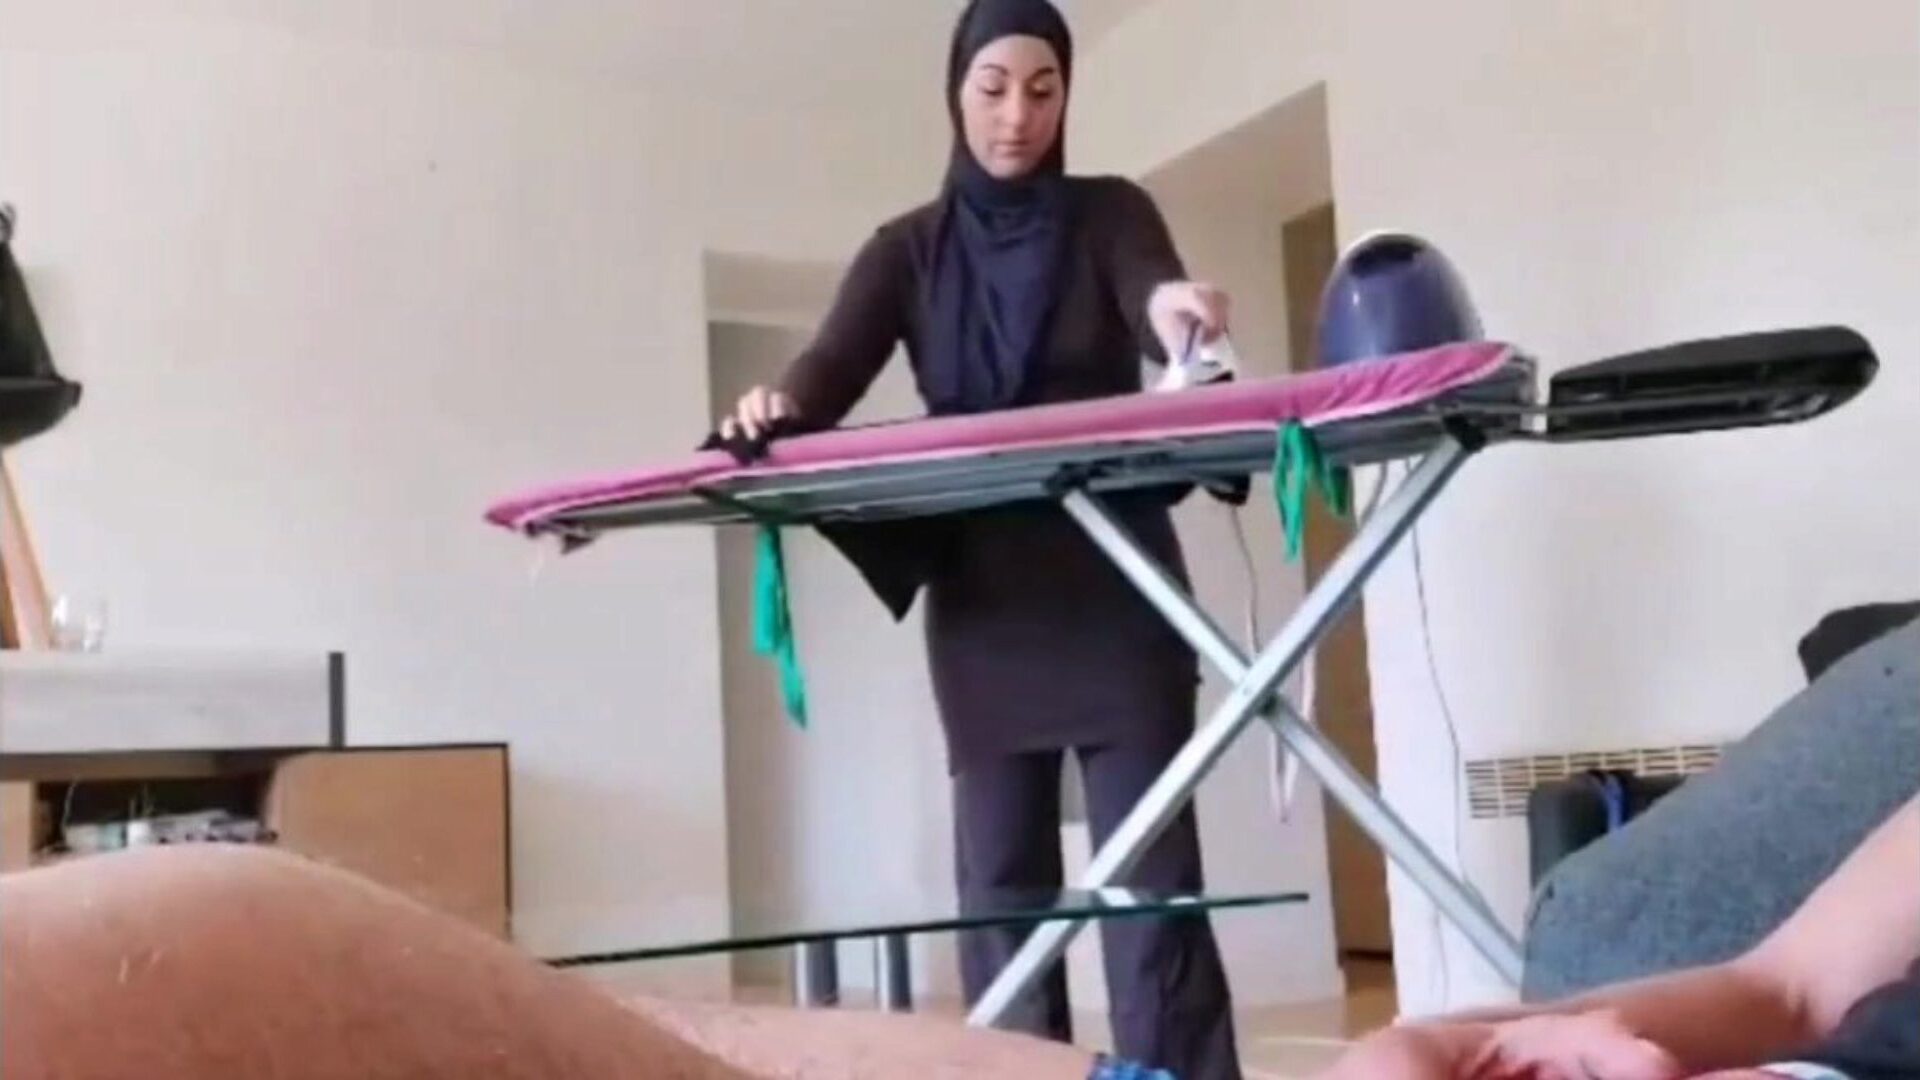 Omg He Pulls out His Cock in Front of this Muslim Maid | xHamster Watch Omg He Pulls out His Cock in Front of this Muslim Maid clip on xHamster - the ultimate selection of free French Arab HD hardcore porno tube movie scenes